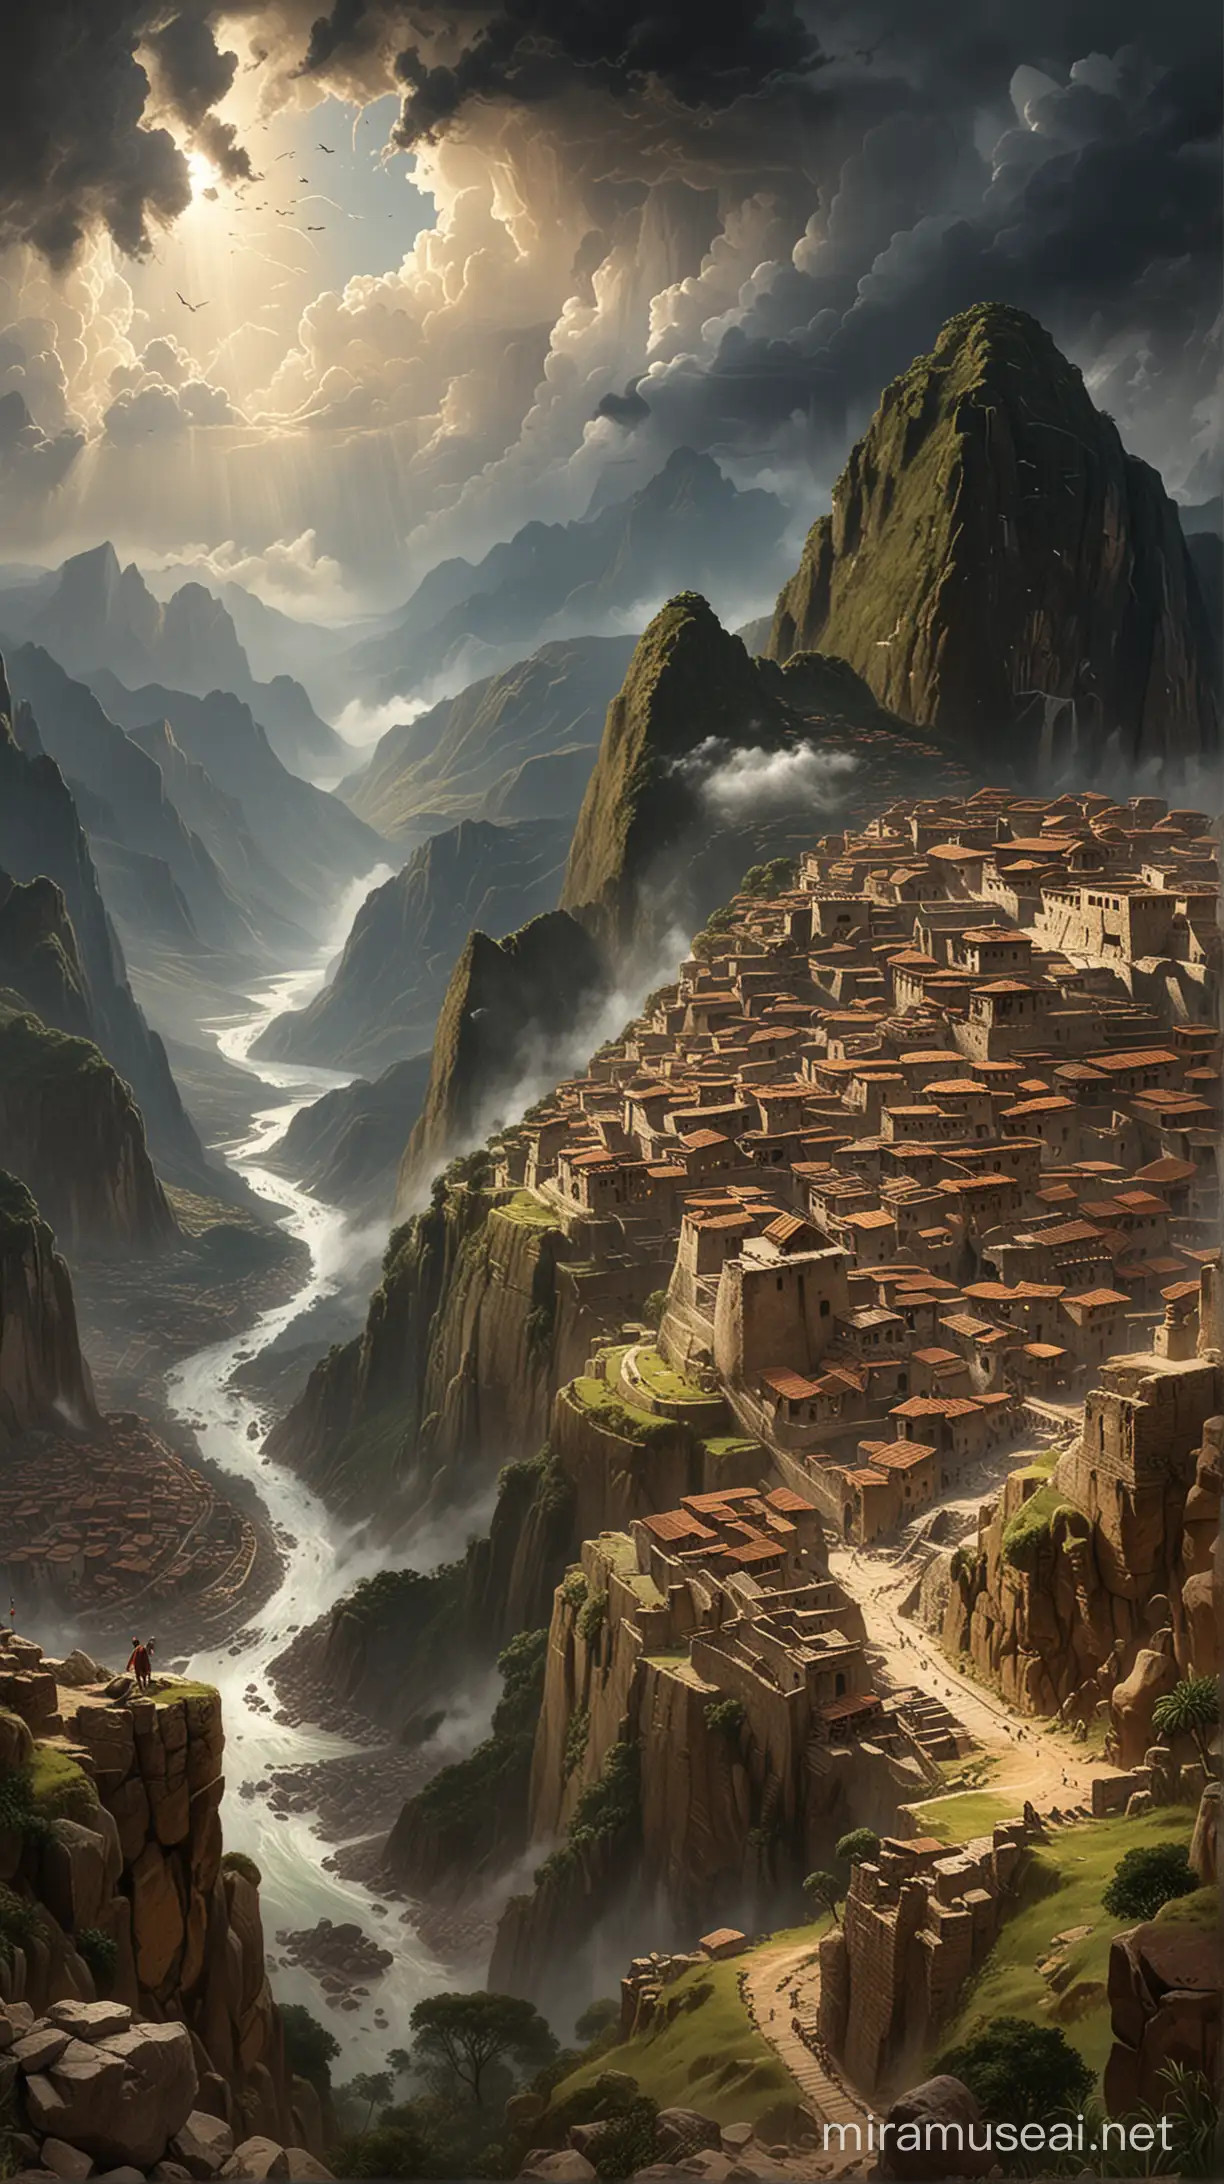 A breathtaking landscape painting of the Inca Empire, showcasing its mountain cities and vast network of roads, with a storm brewing ominously on the horizon.
